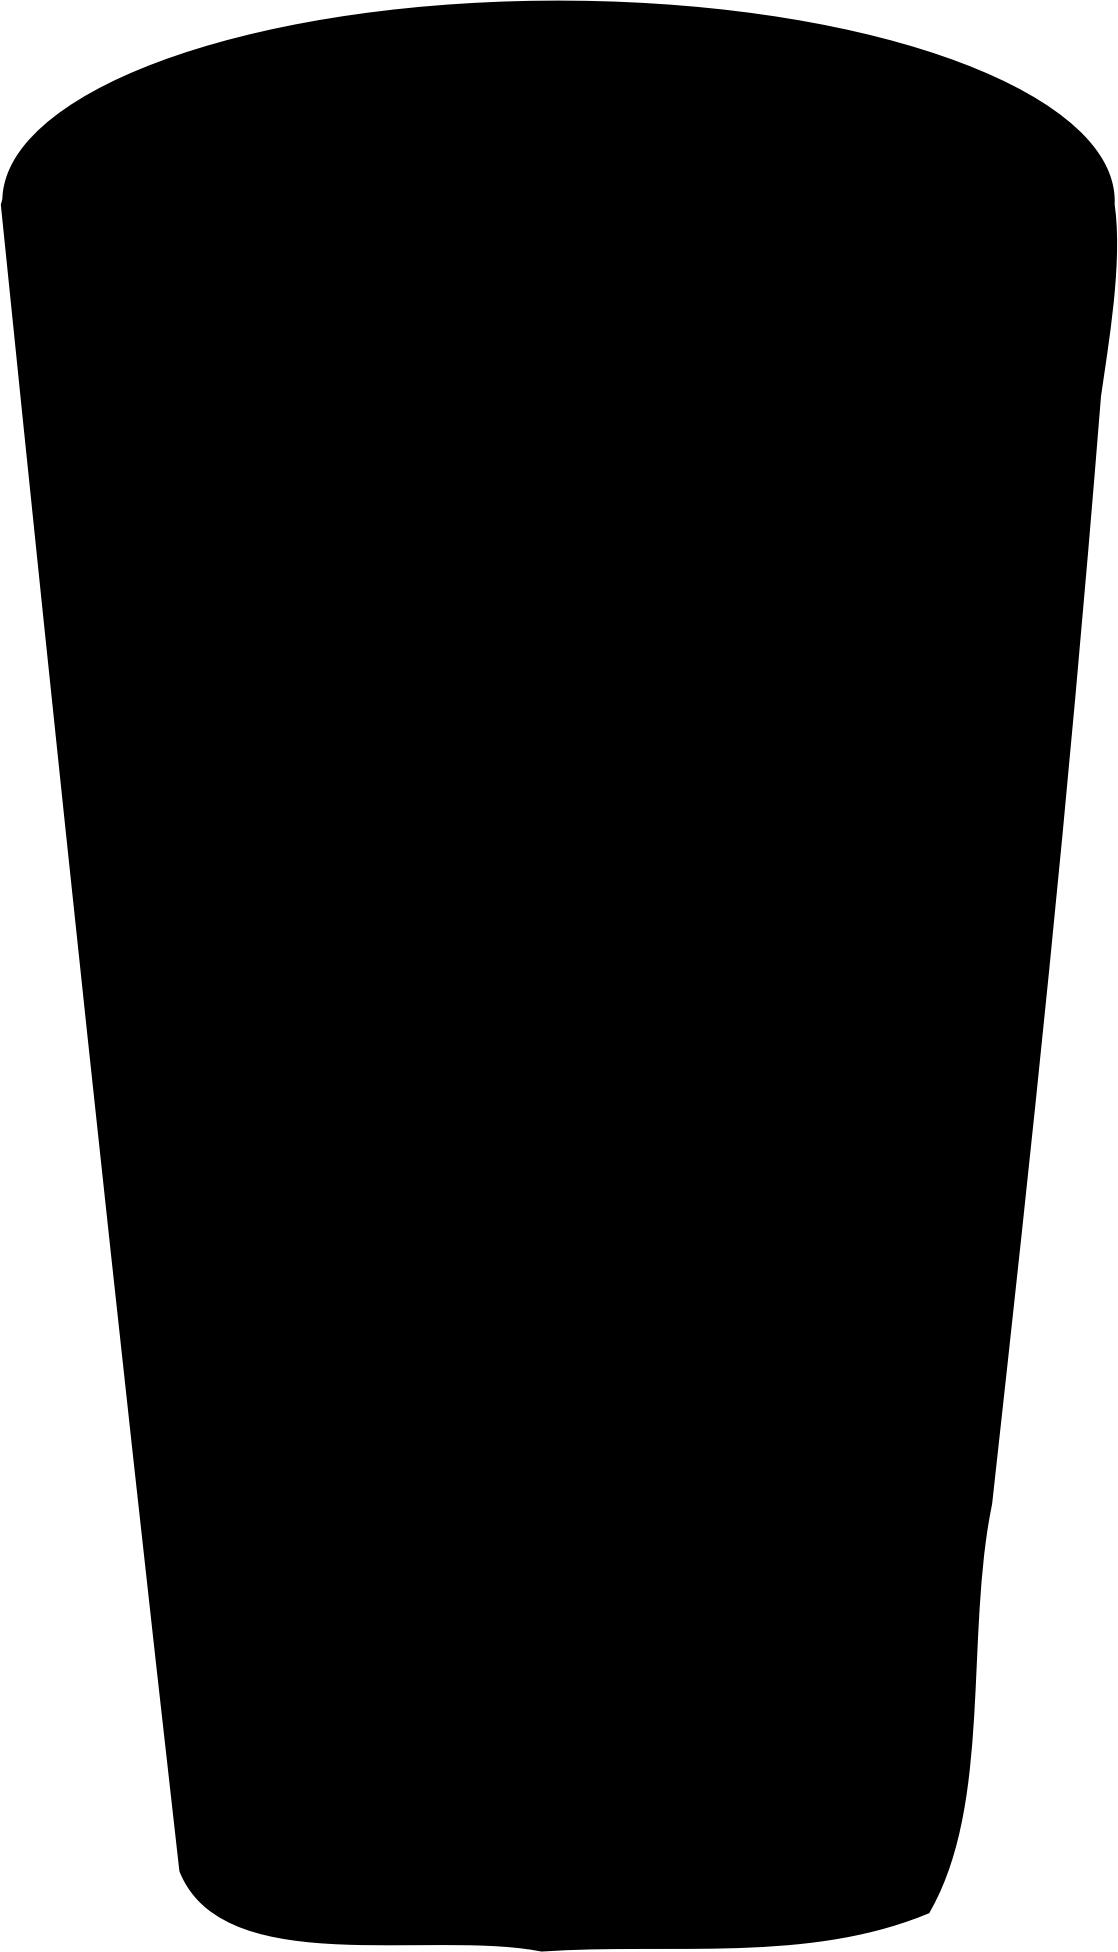 A Pint of Stout Beer 1 png